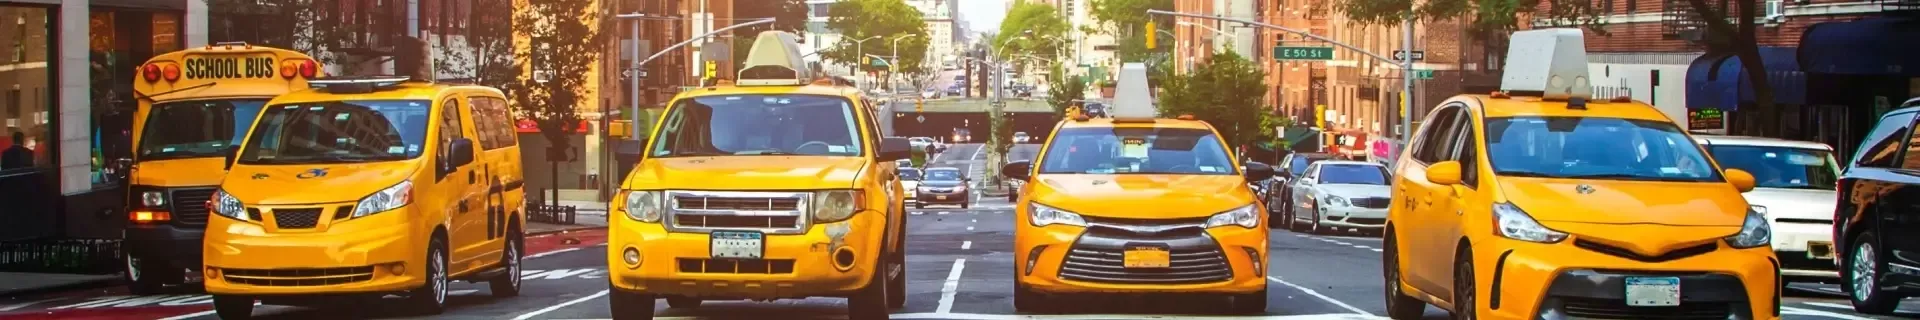 Taxi's New York